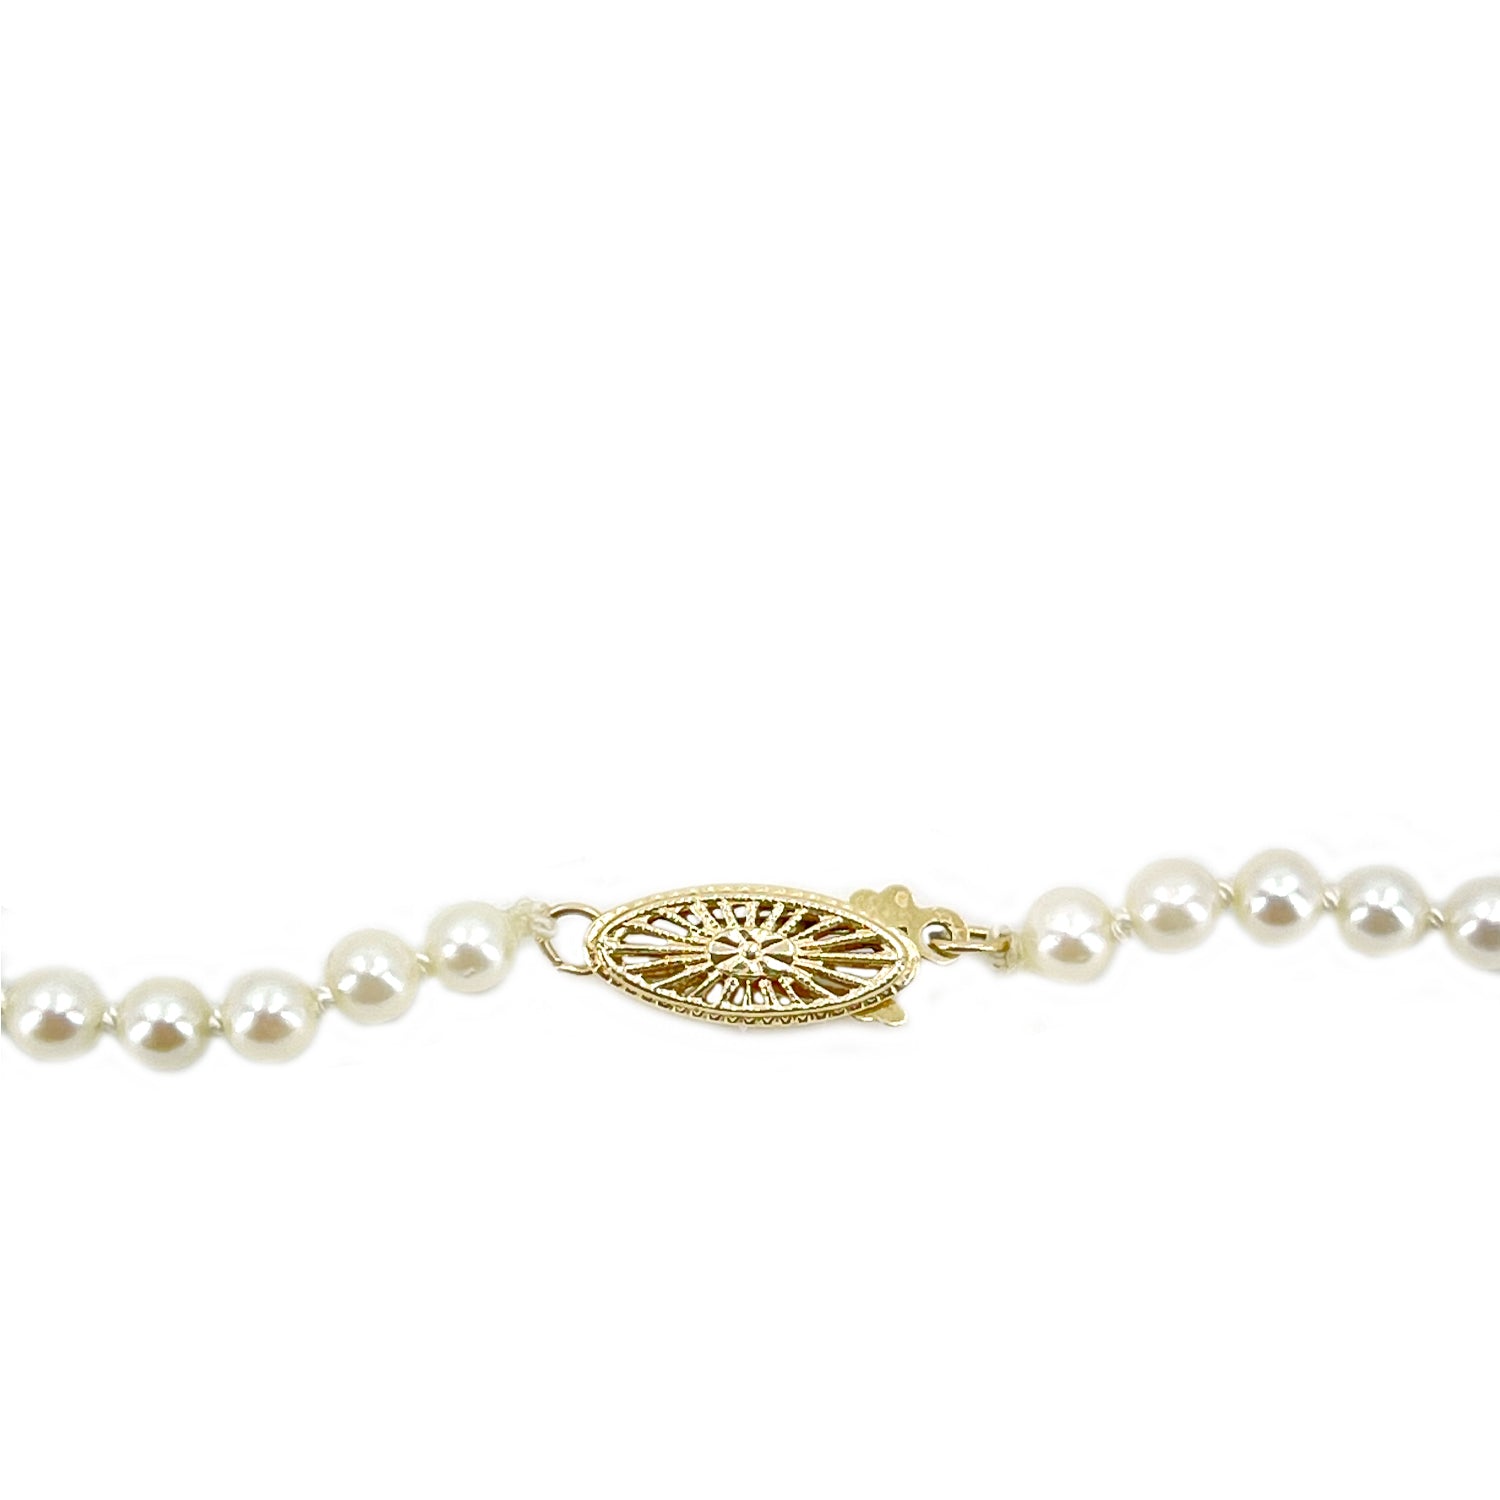 Graduated Starburst Filigree Japanese Cultured Saltwater Akoya Pearl Vintage Necklace - 14K Yellow Gold 20.50 Inch